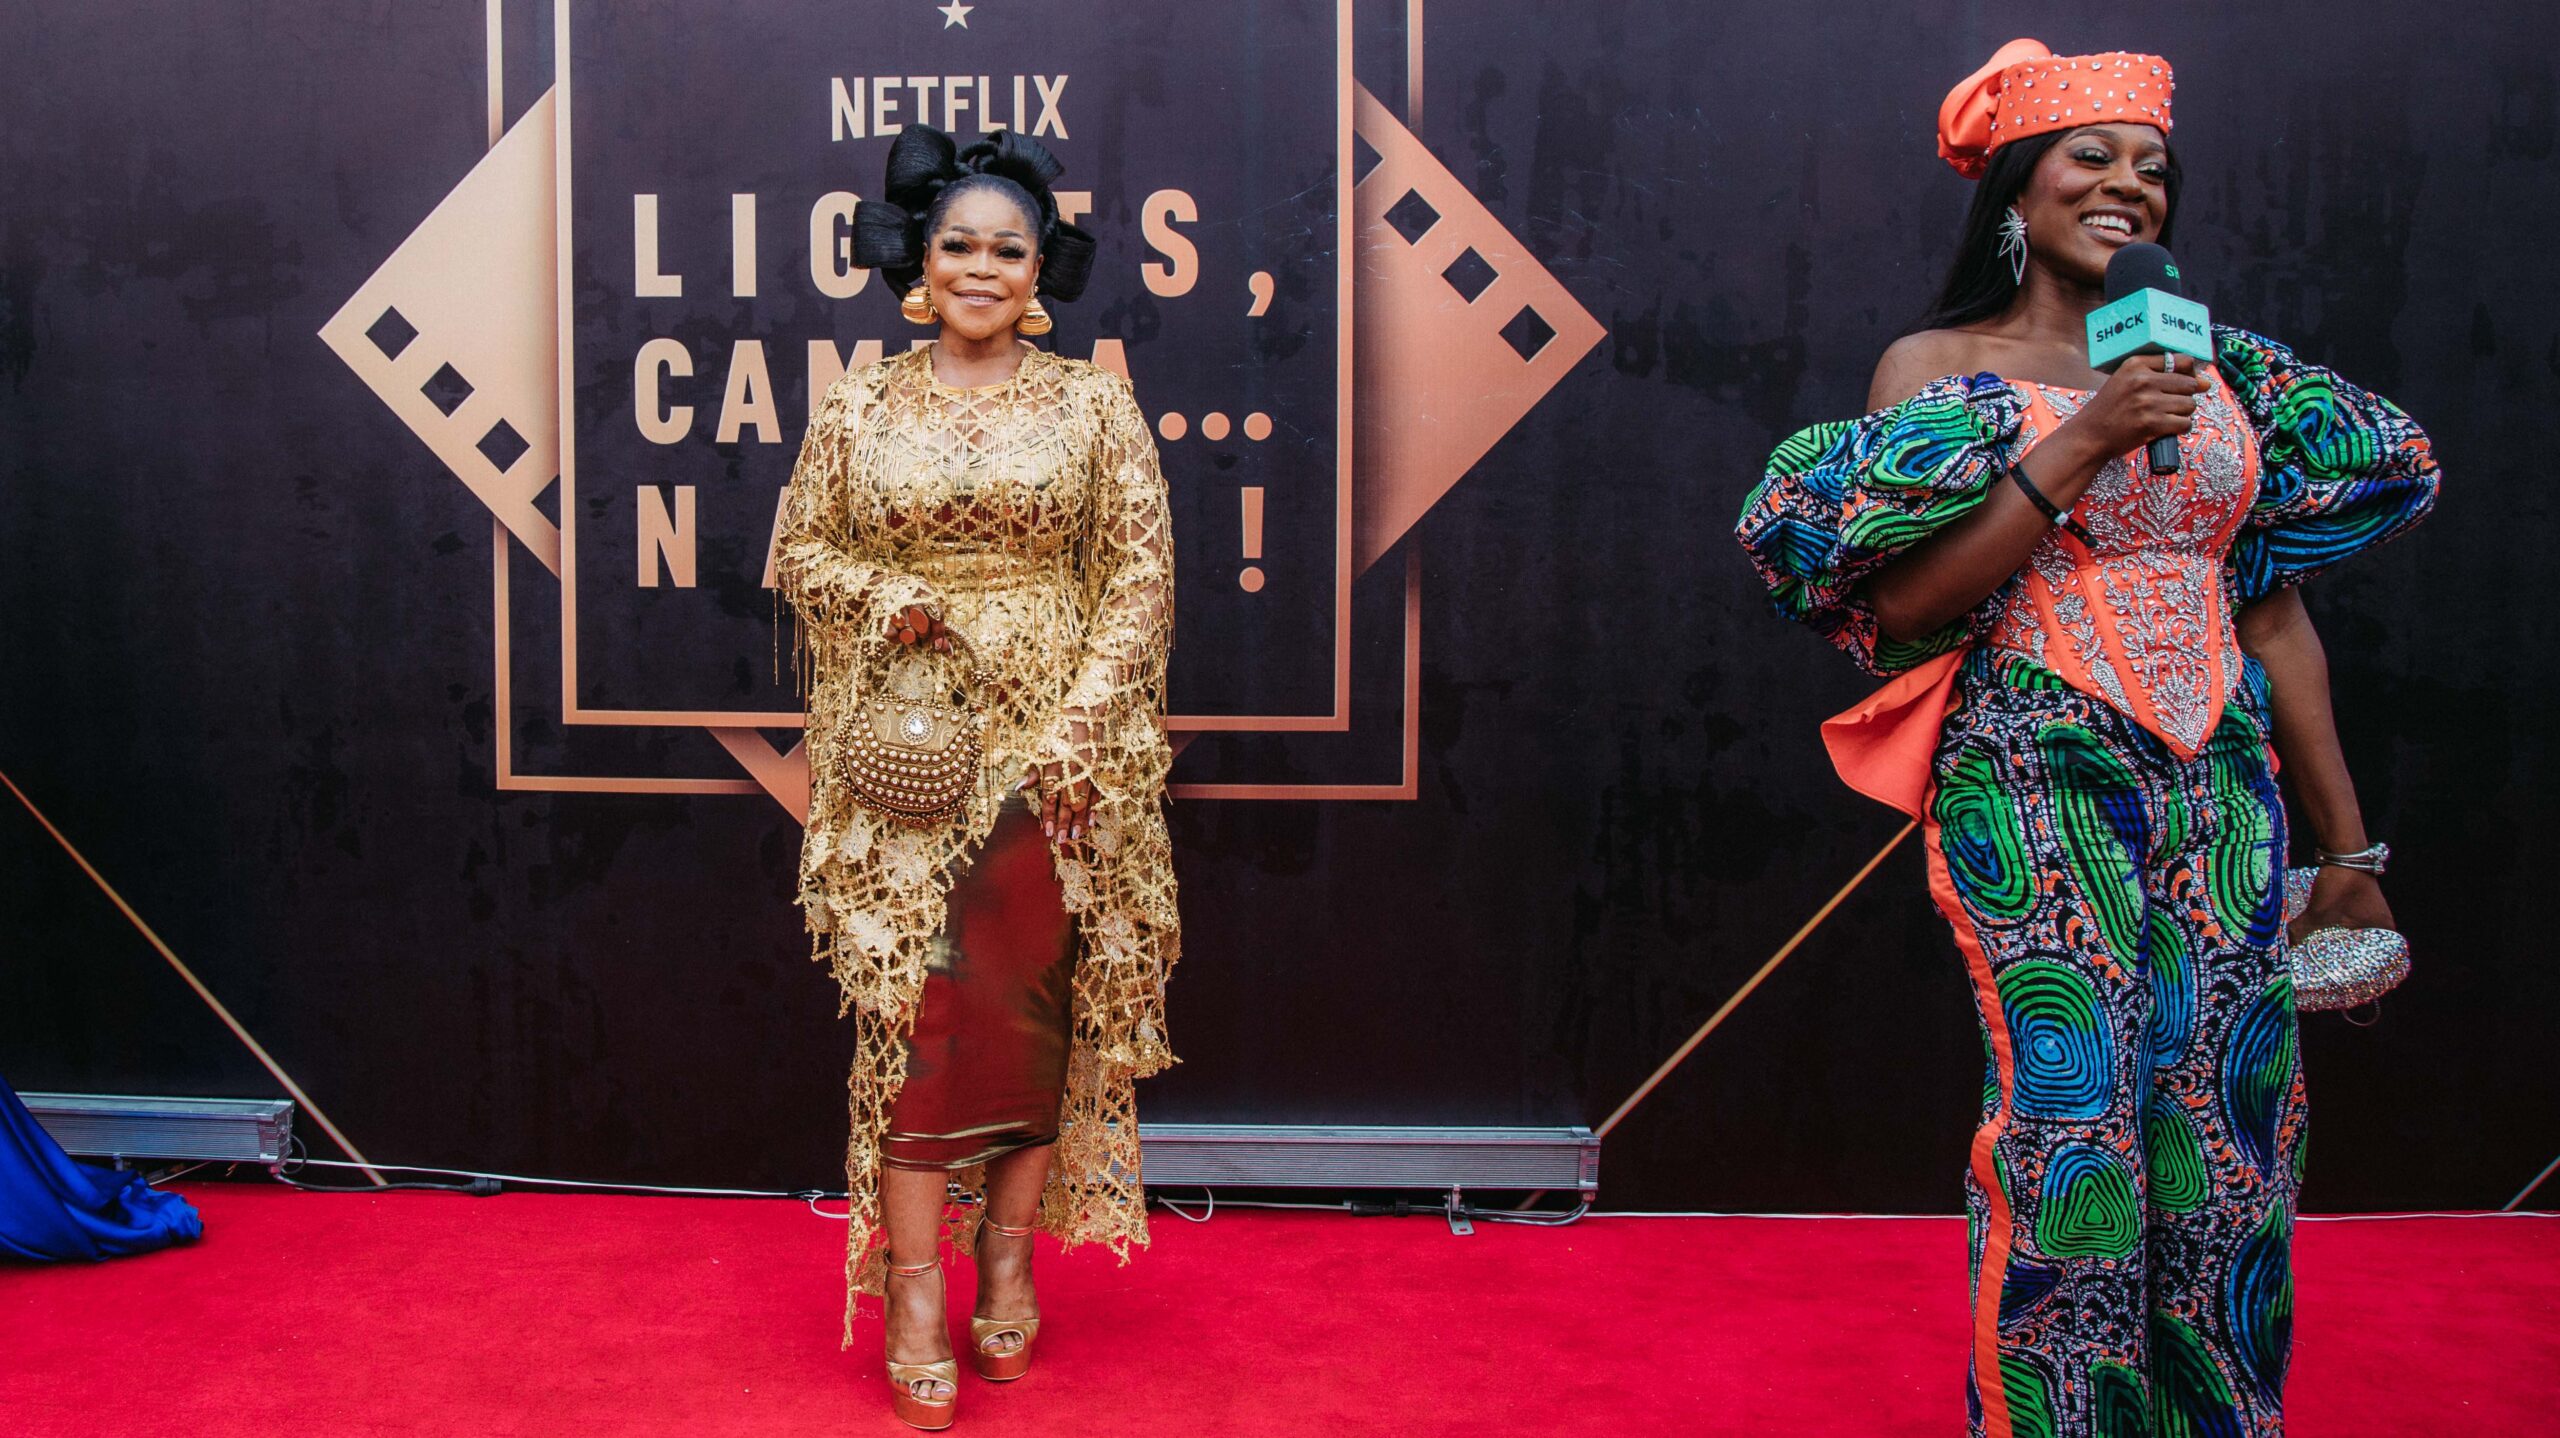 RED CARPET 325 scaled - Red Carpet Photos From Netflix's "Lights, Action, Naija!"